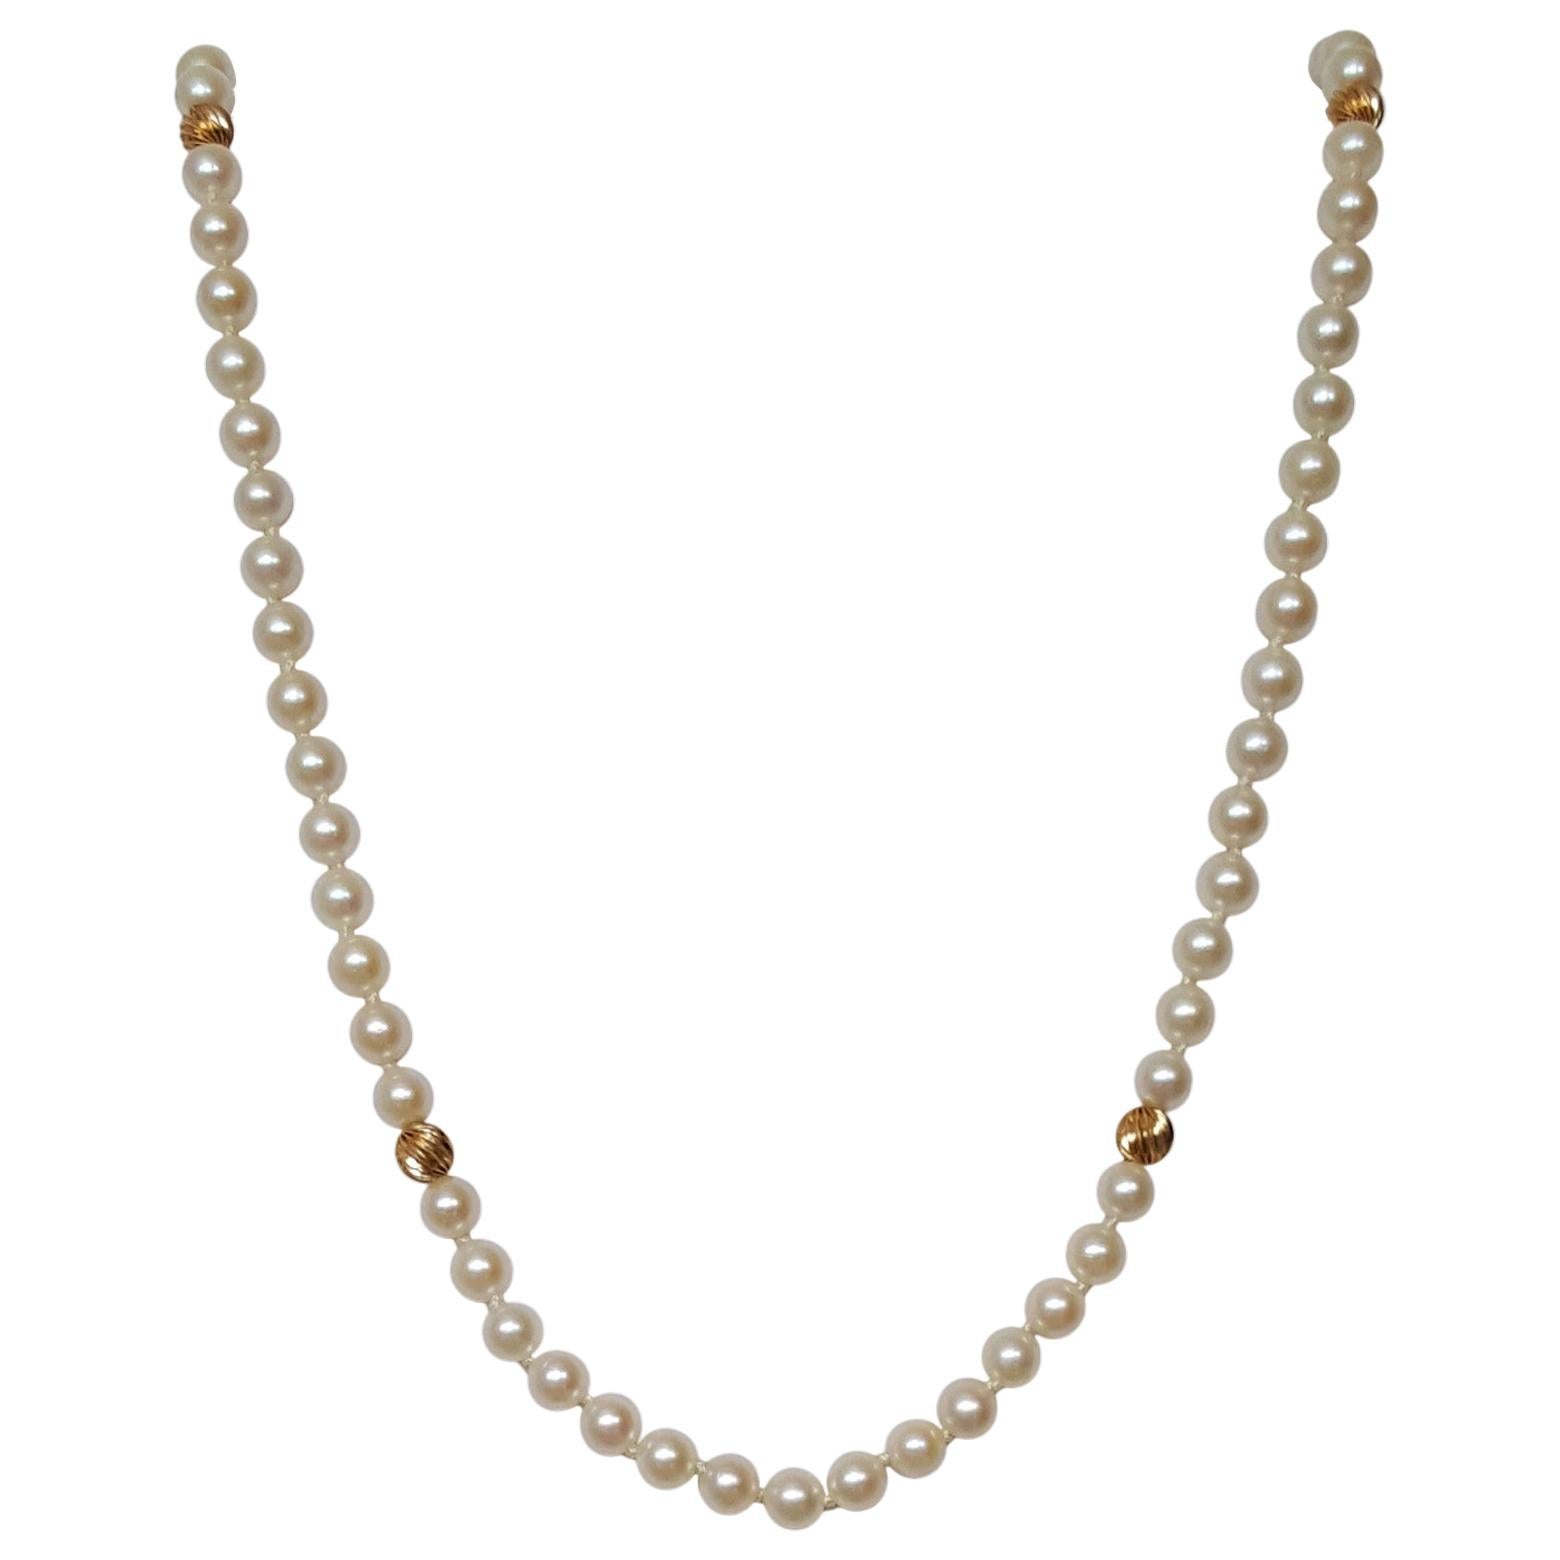 Cultured Pearl Strand Grade A White Cream Pearls 14kt Yellow Gold Beads, 31 Inch